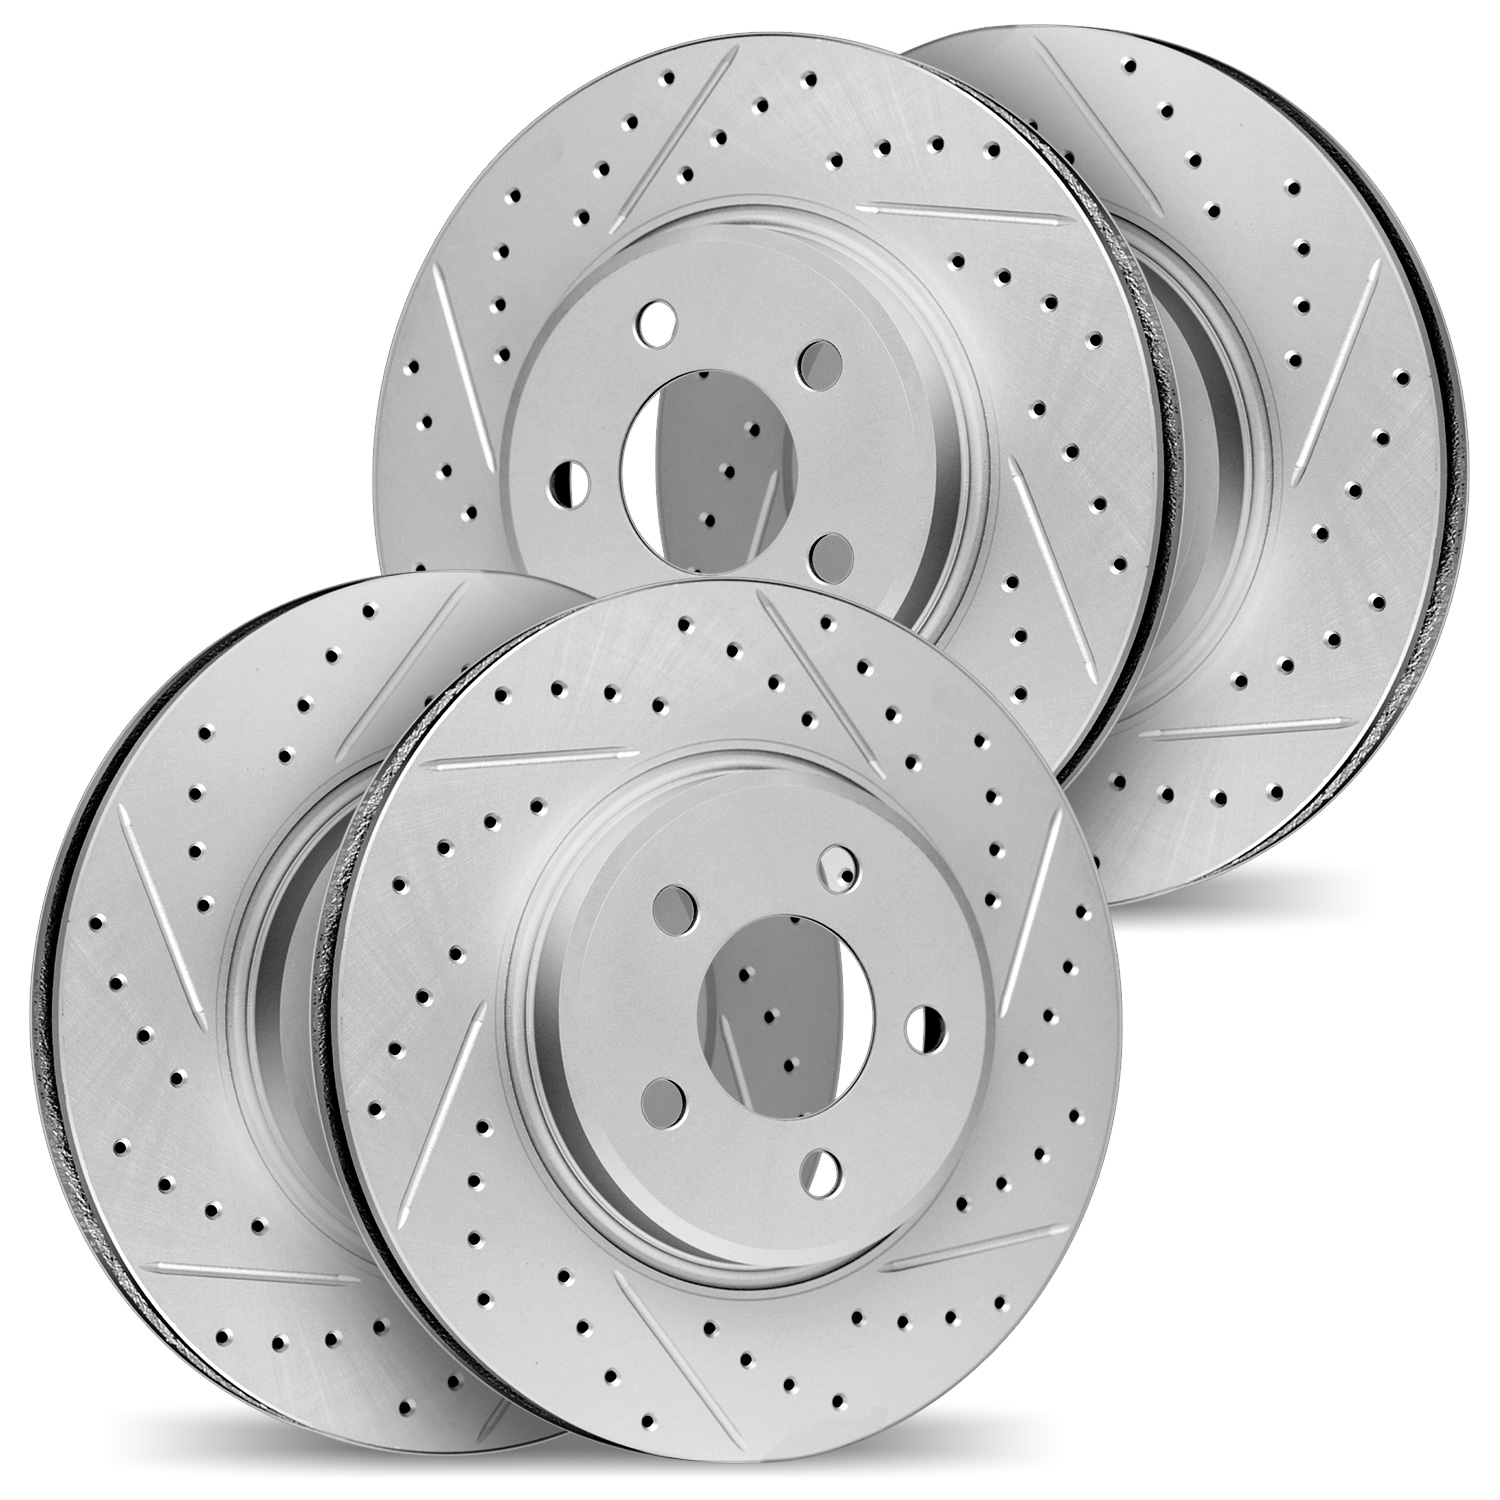 2004-47029 Geoperformance Drilled/Slotted Brake Rotors, Fits Select GM, Position: Front and Rear